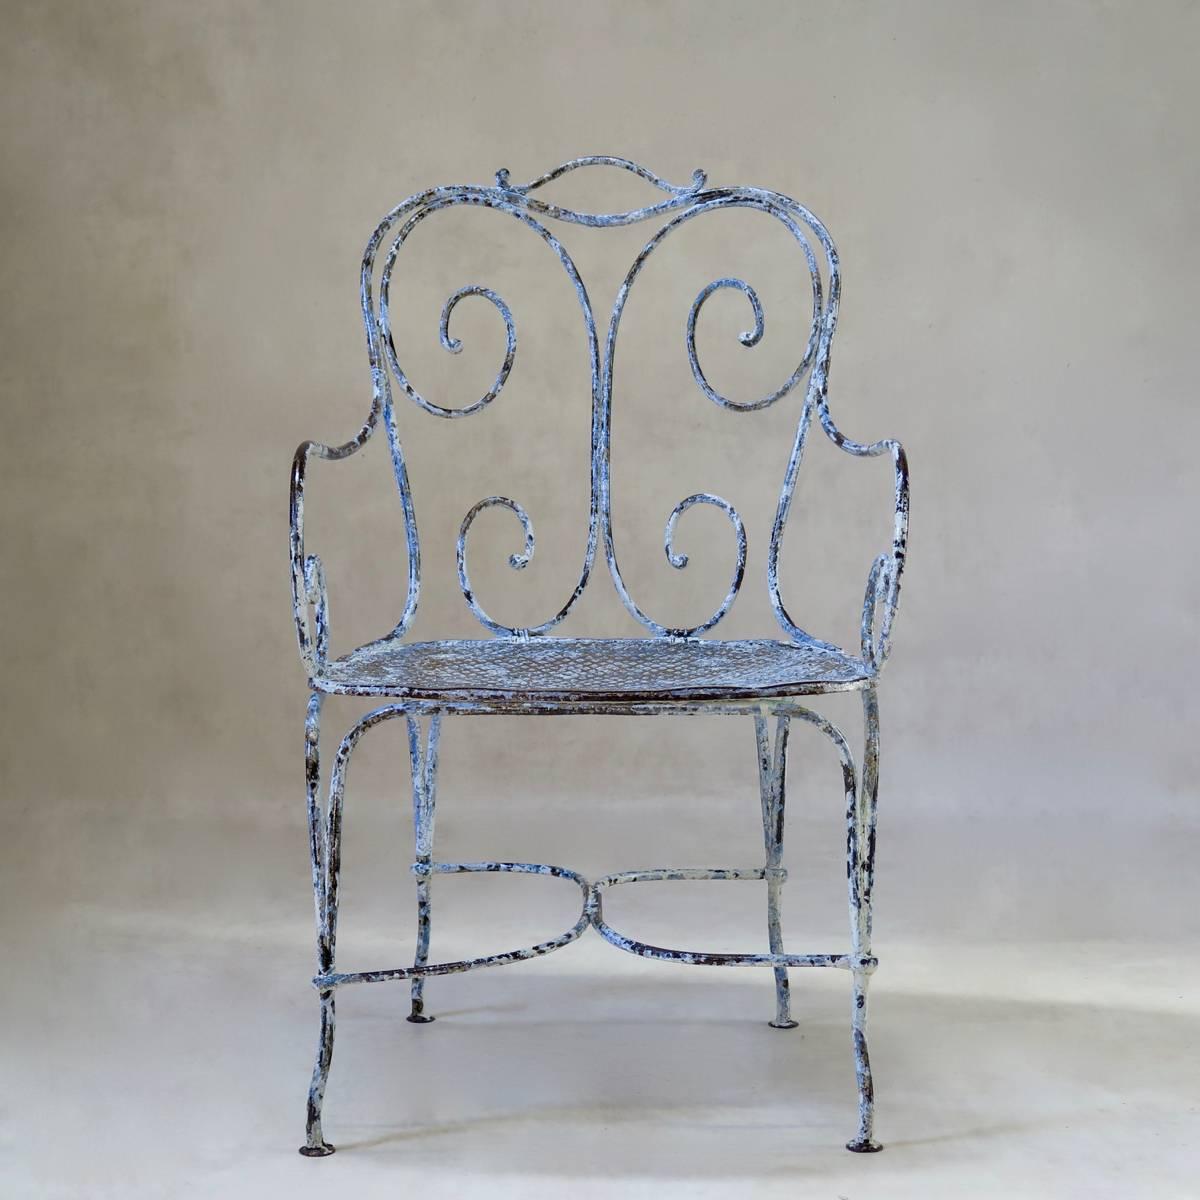 Very elegant, unusually wide, painted wrought iron garden chair. Sturdy, heavy and beautiful. Blue and white paints visible.